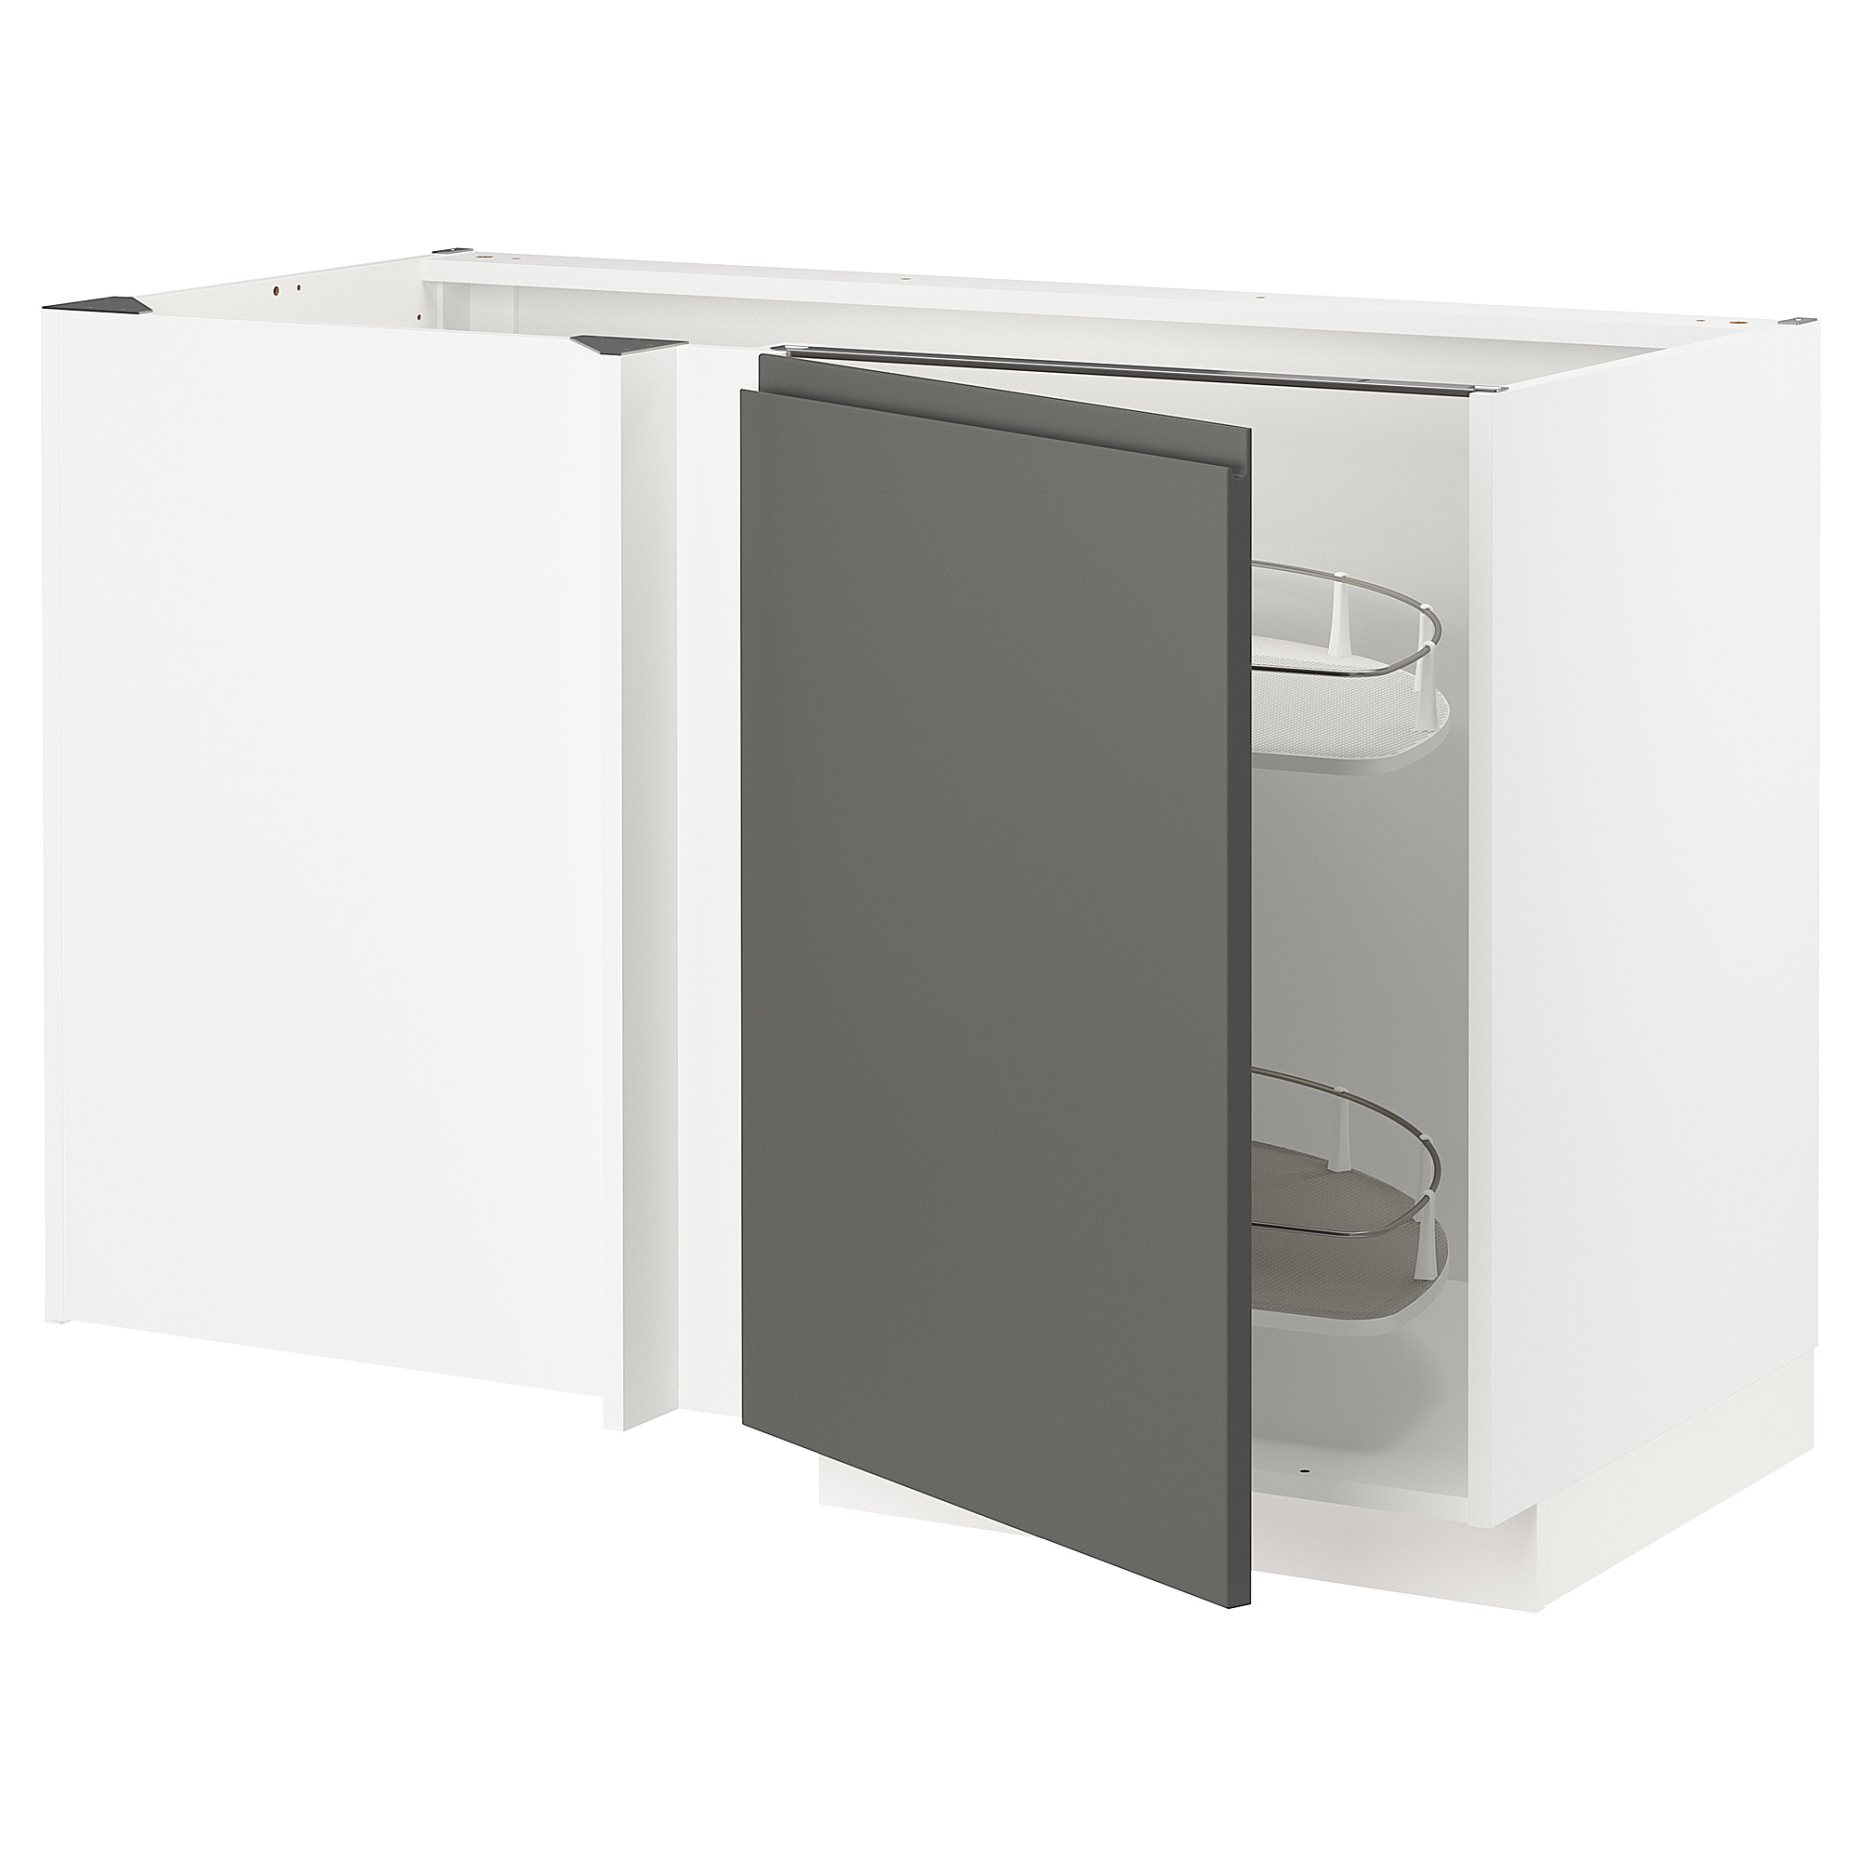 METOD, corner base cabinet with pull-out fitting, 128x68 cm, 794.554.98